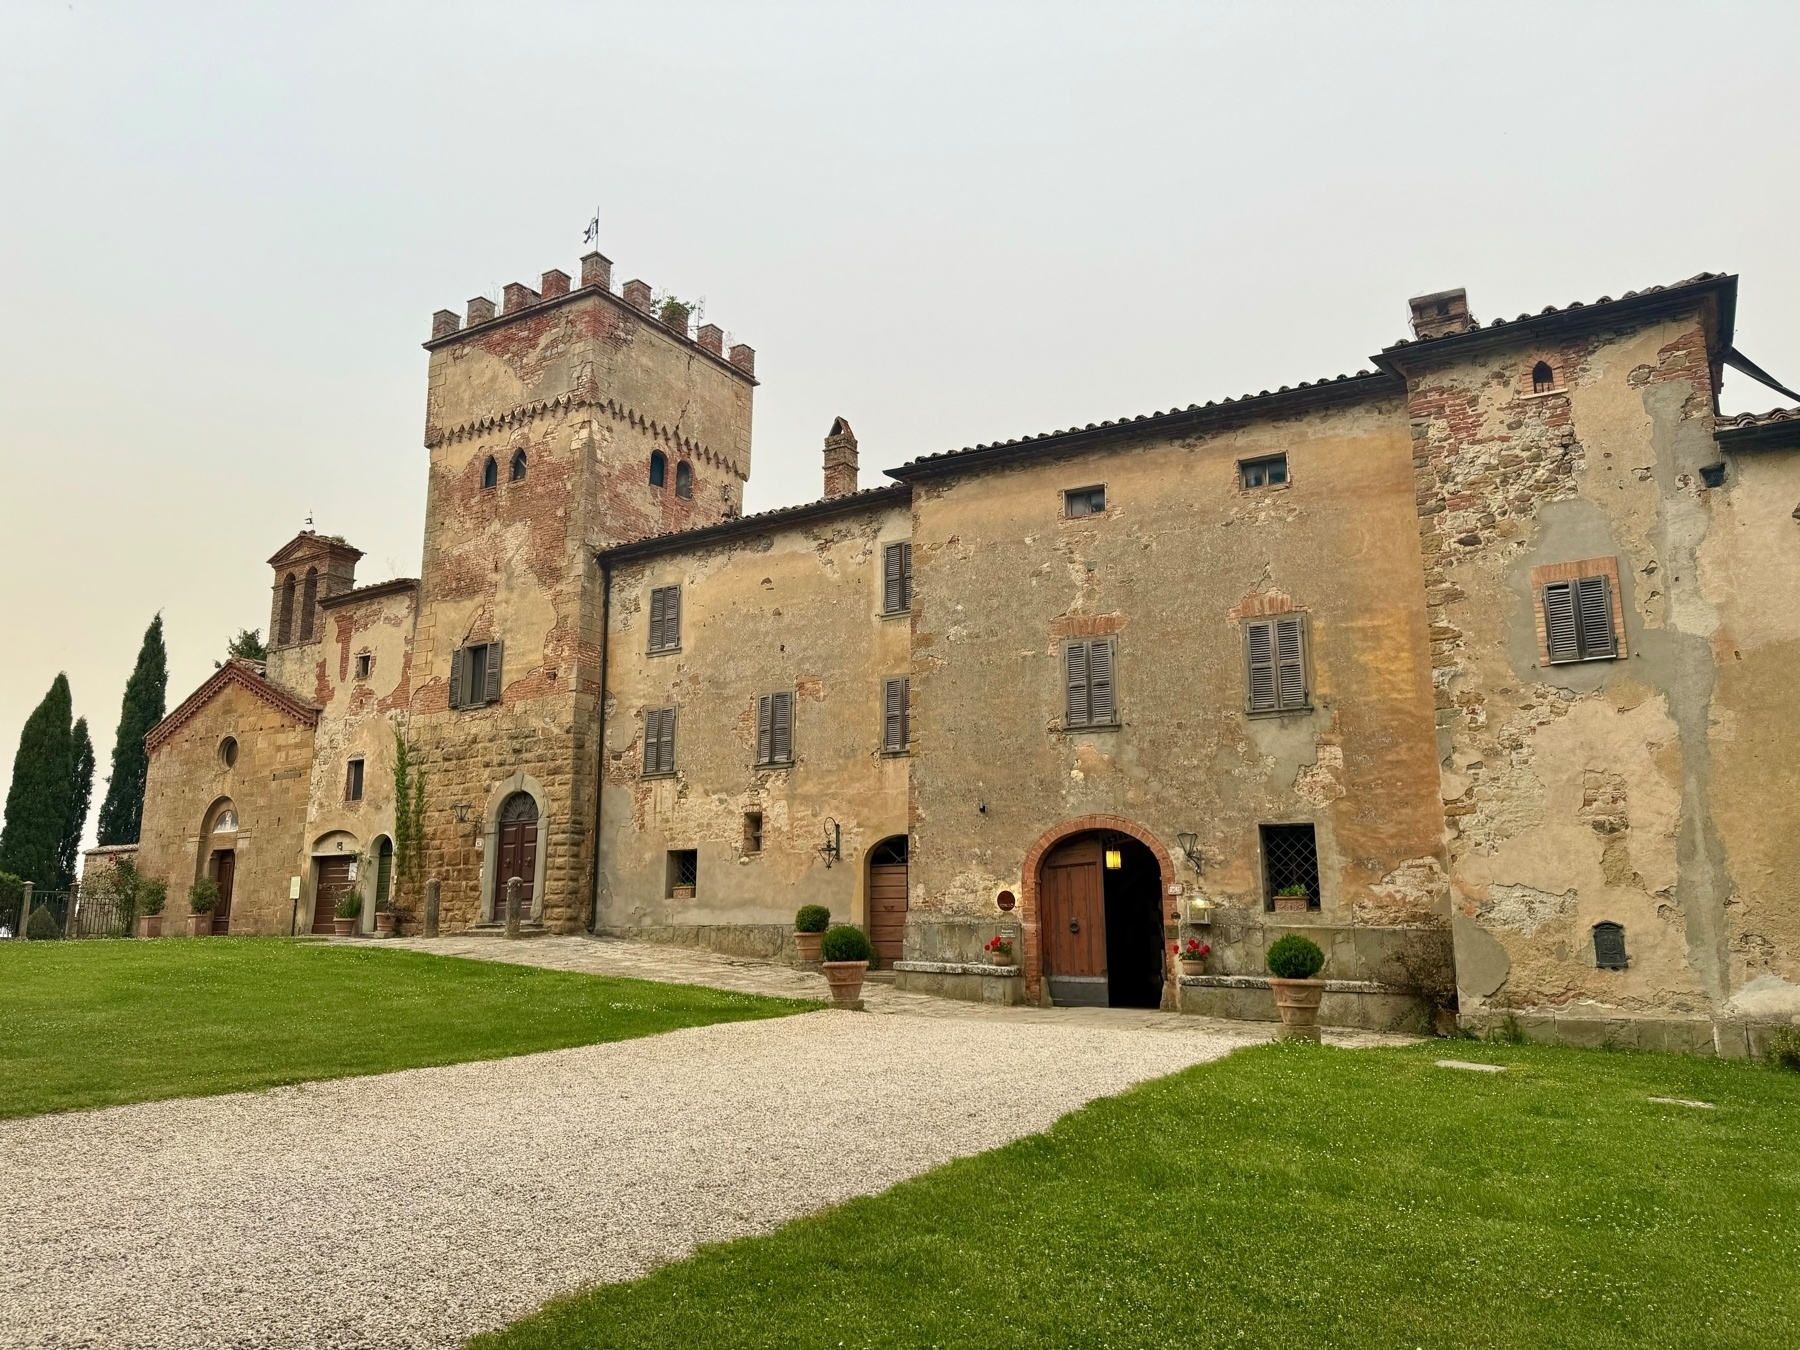 A historic, weathered stone building with a tall, crenellated tower, arched doorways, and shuttered windows. The structure includes both medieval and Renaissance architectural elements with a large, grassy courtyard and a gravel path leading to the entrance.